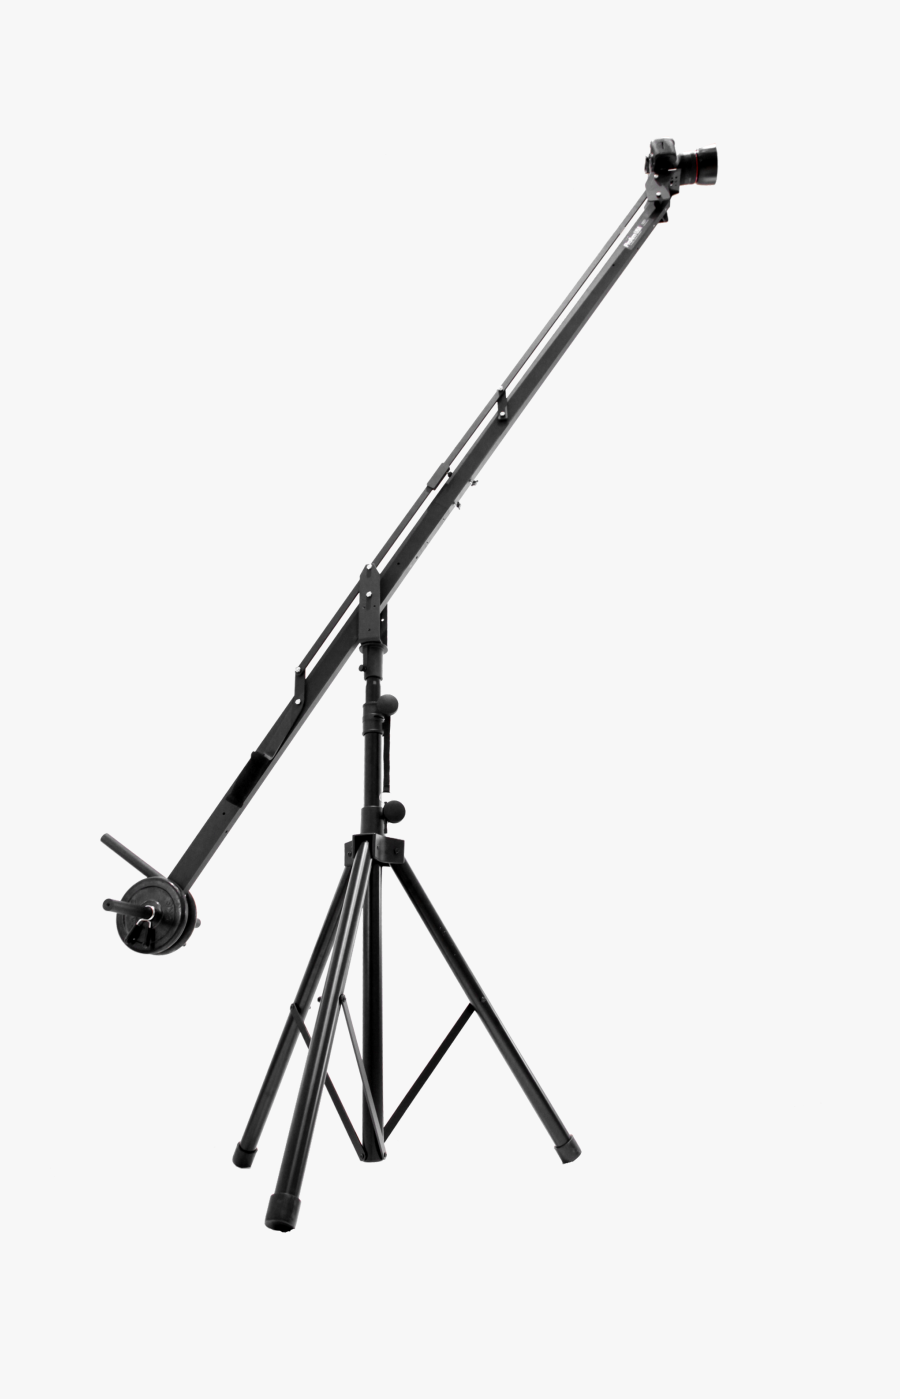 Microphone Stands Tripod Line - Tripod Microphone Png, Transparent Clipart